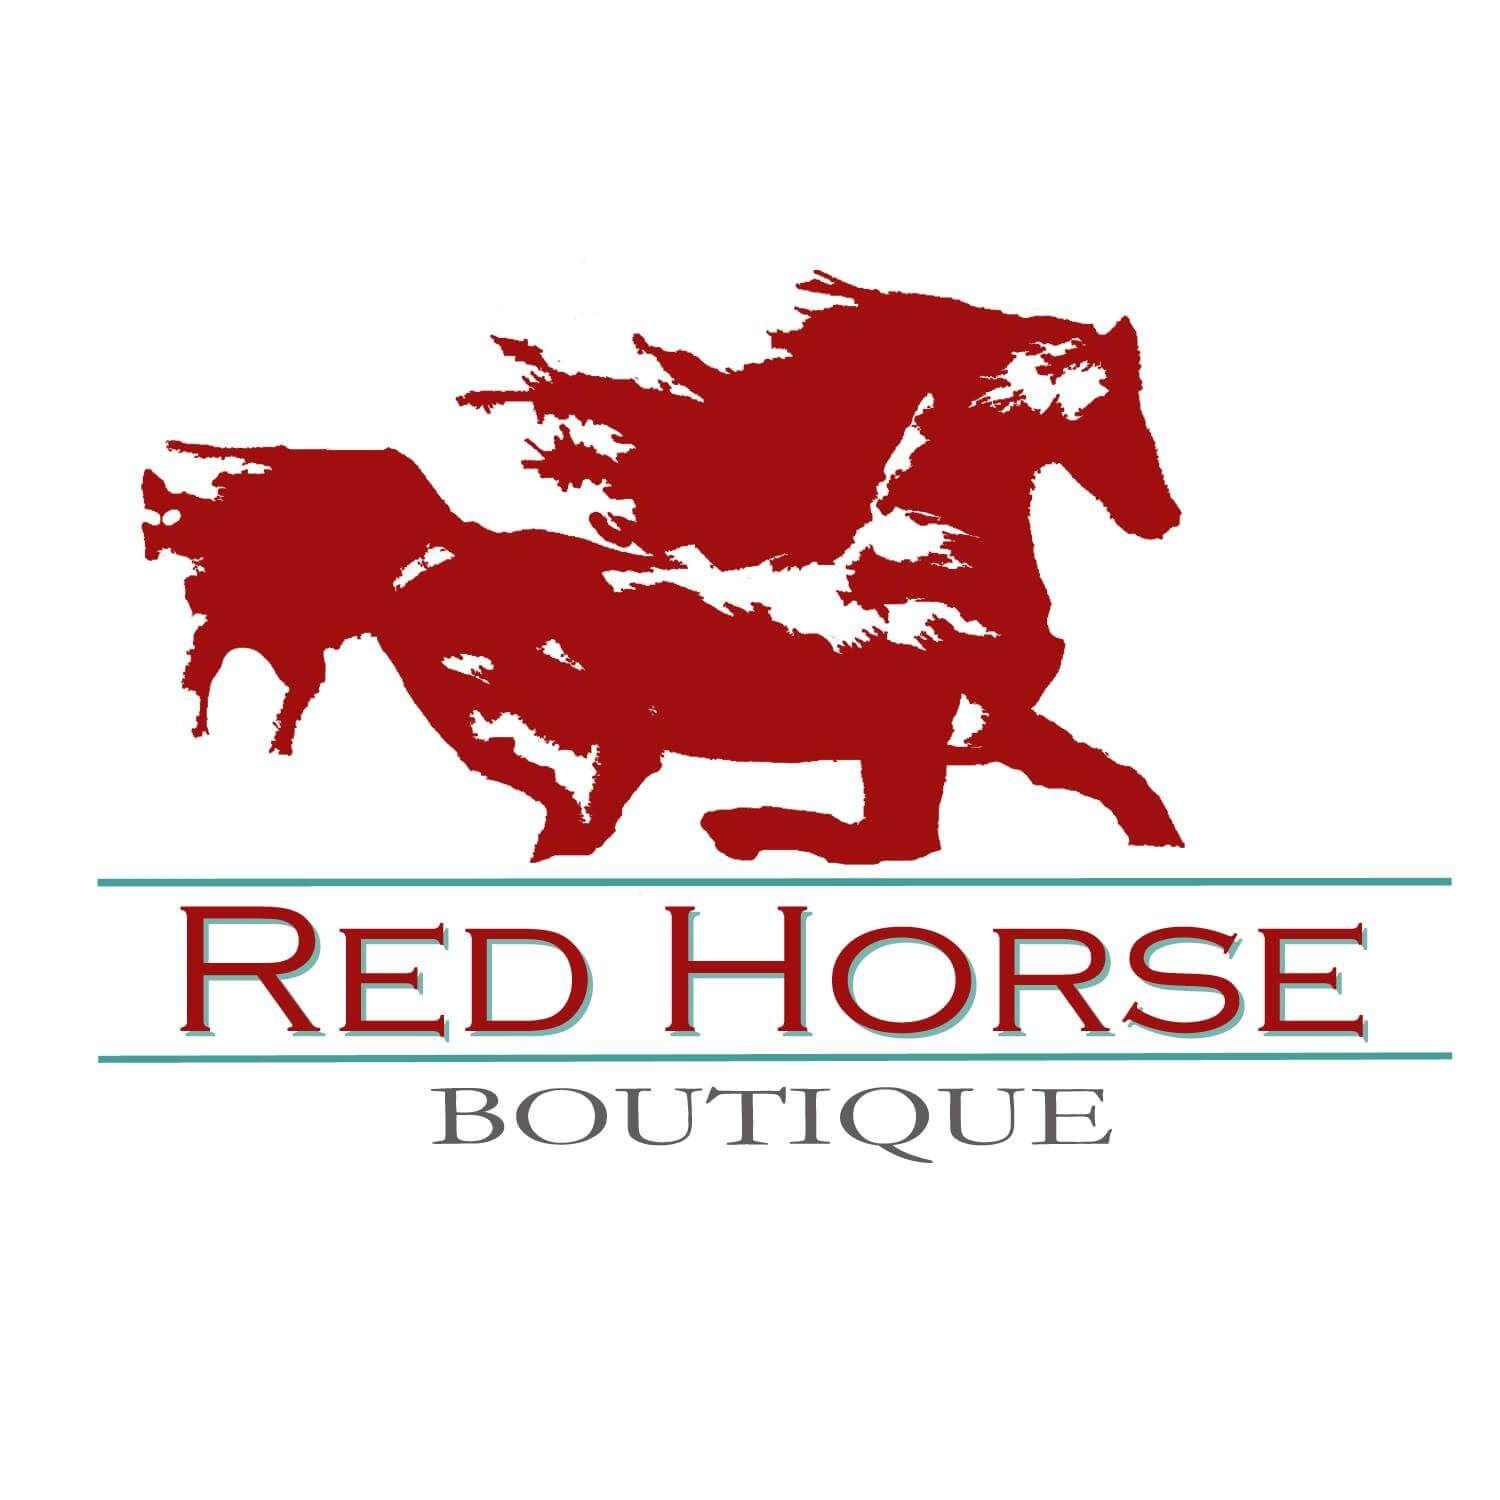 Red Horse Logo - Red Horse Boutique Shops At Willow Park